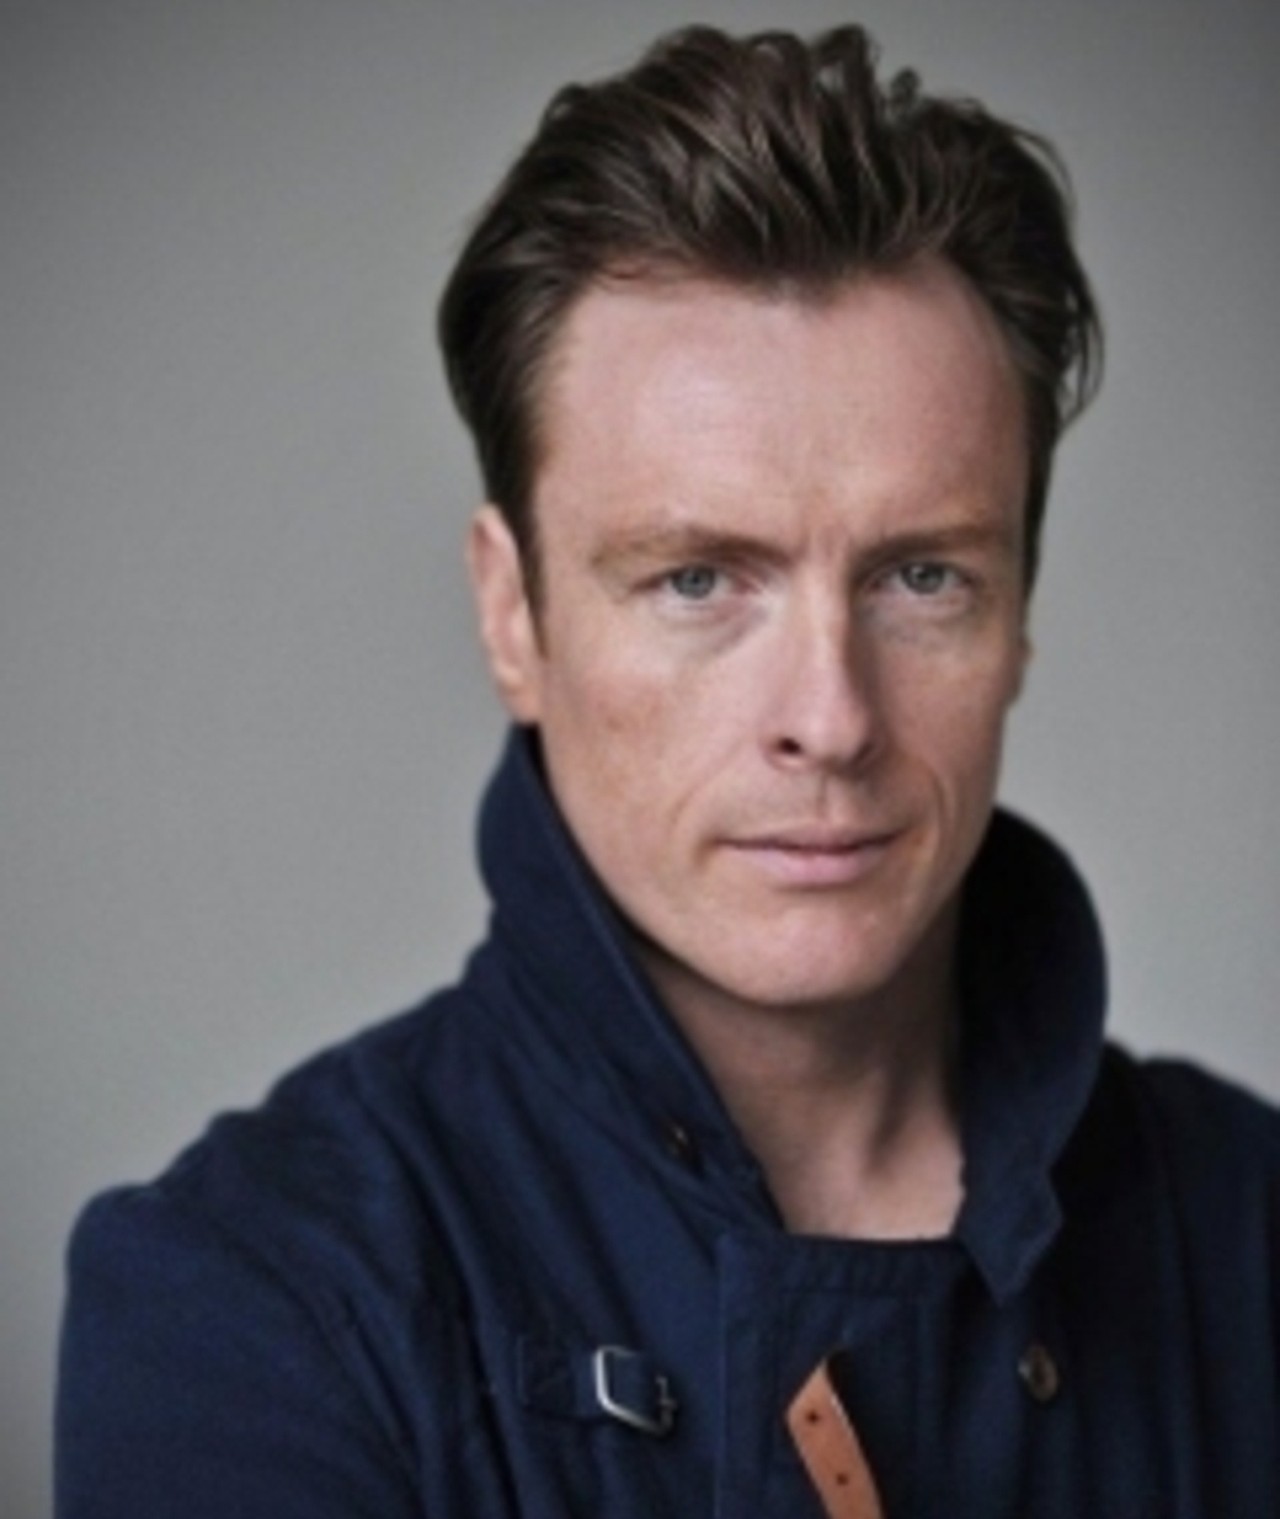 Toby Stephens, Movies and Filmography